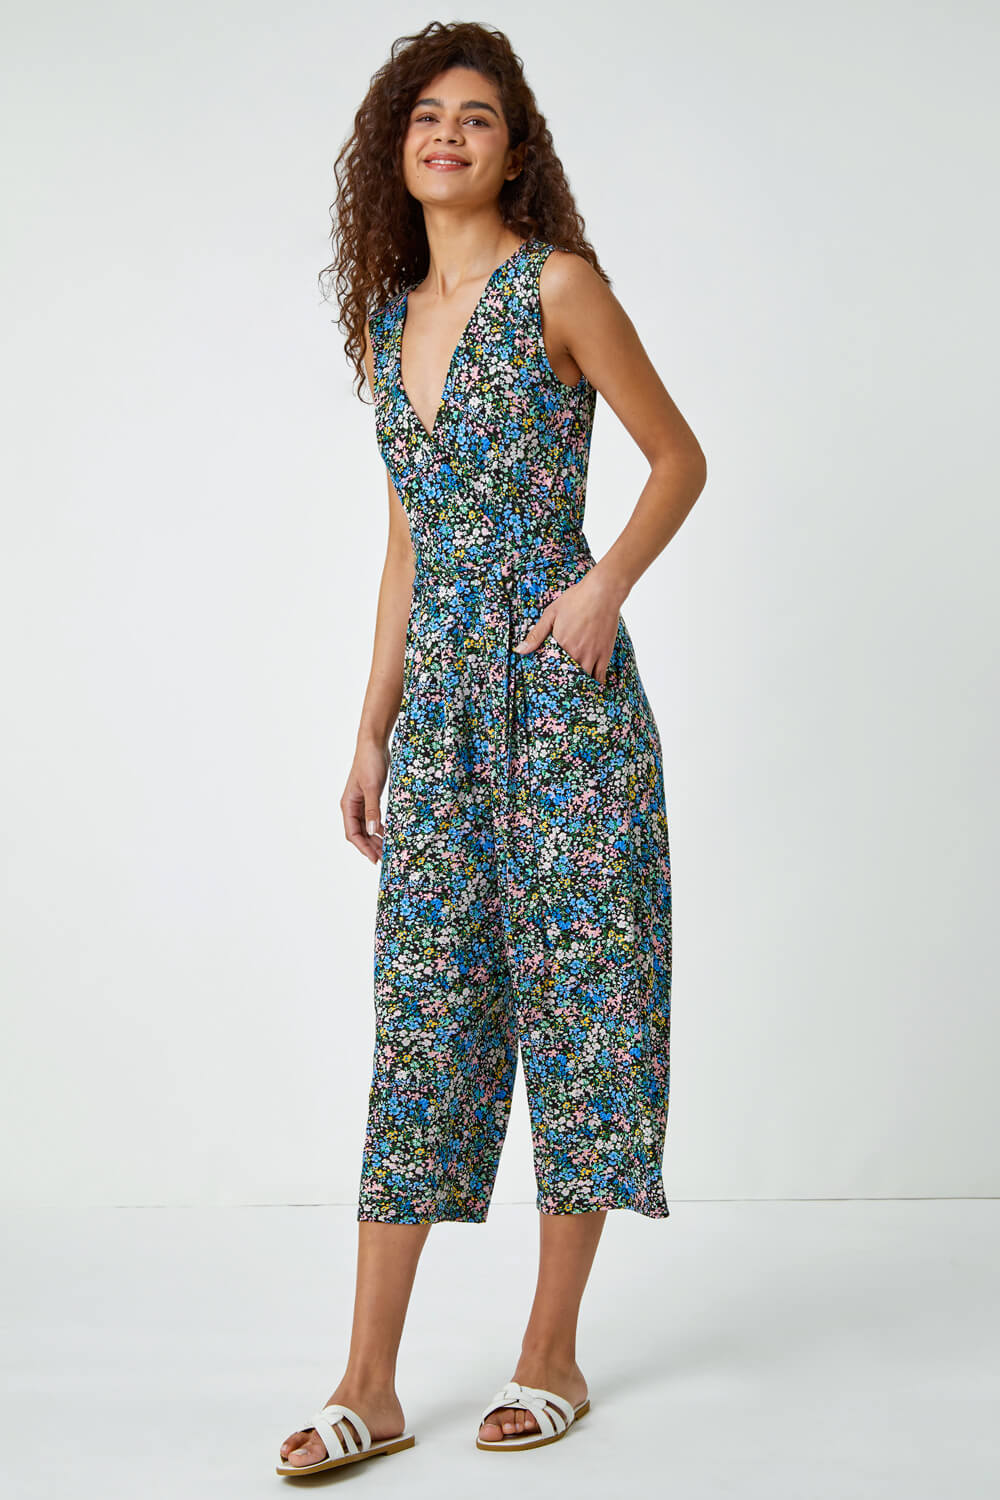 Blue Sleeveless Floral Print Stretch Jumpsuit , Image 4 of 5